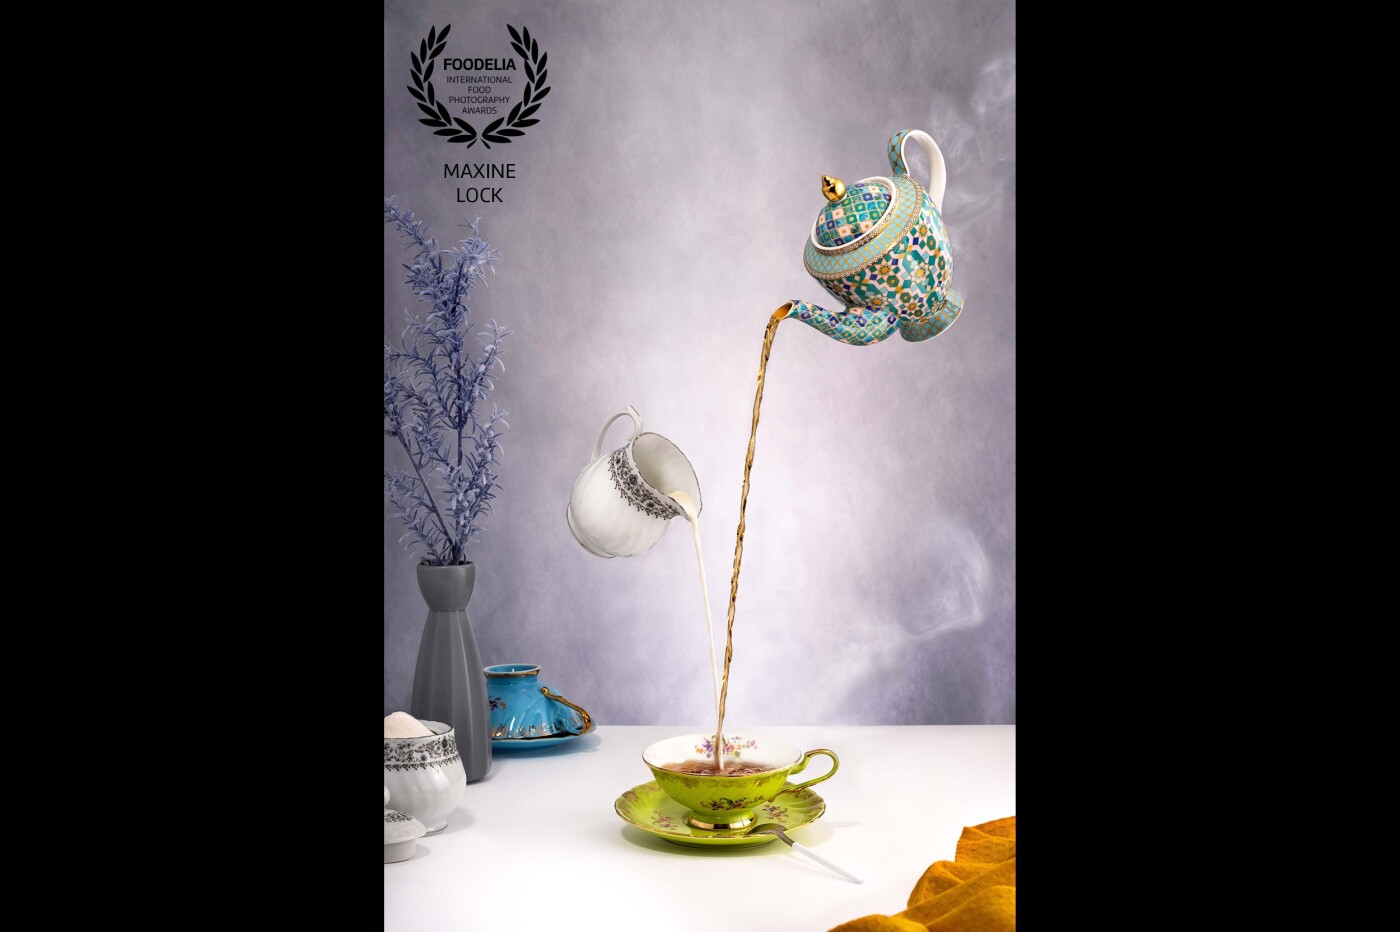 A "levitating" teapot & milk jug image, while incorporating "stream" into the image using a smoke machine that I had purchased recently.